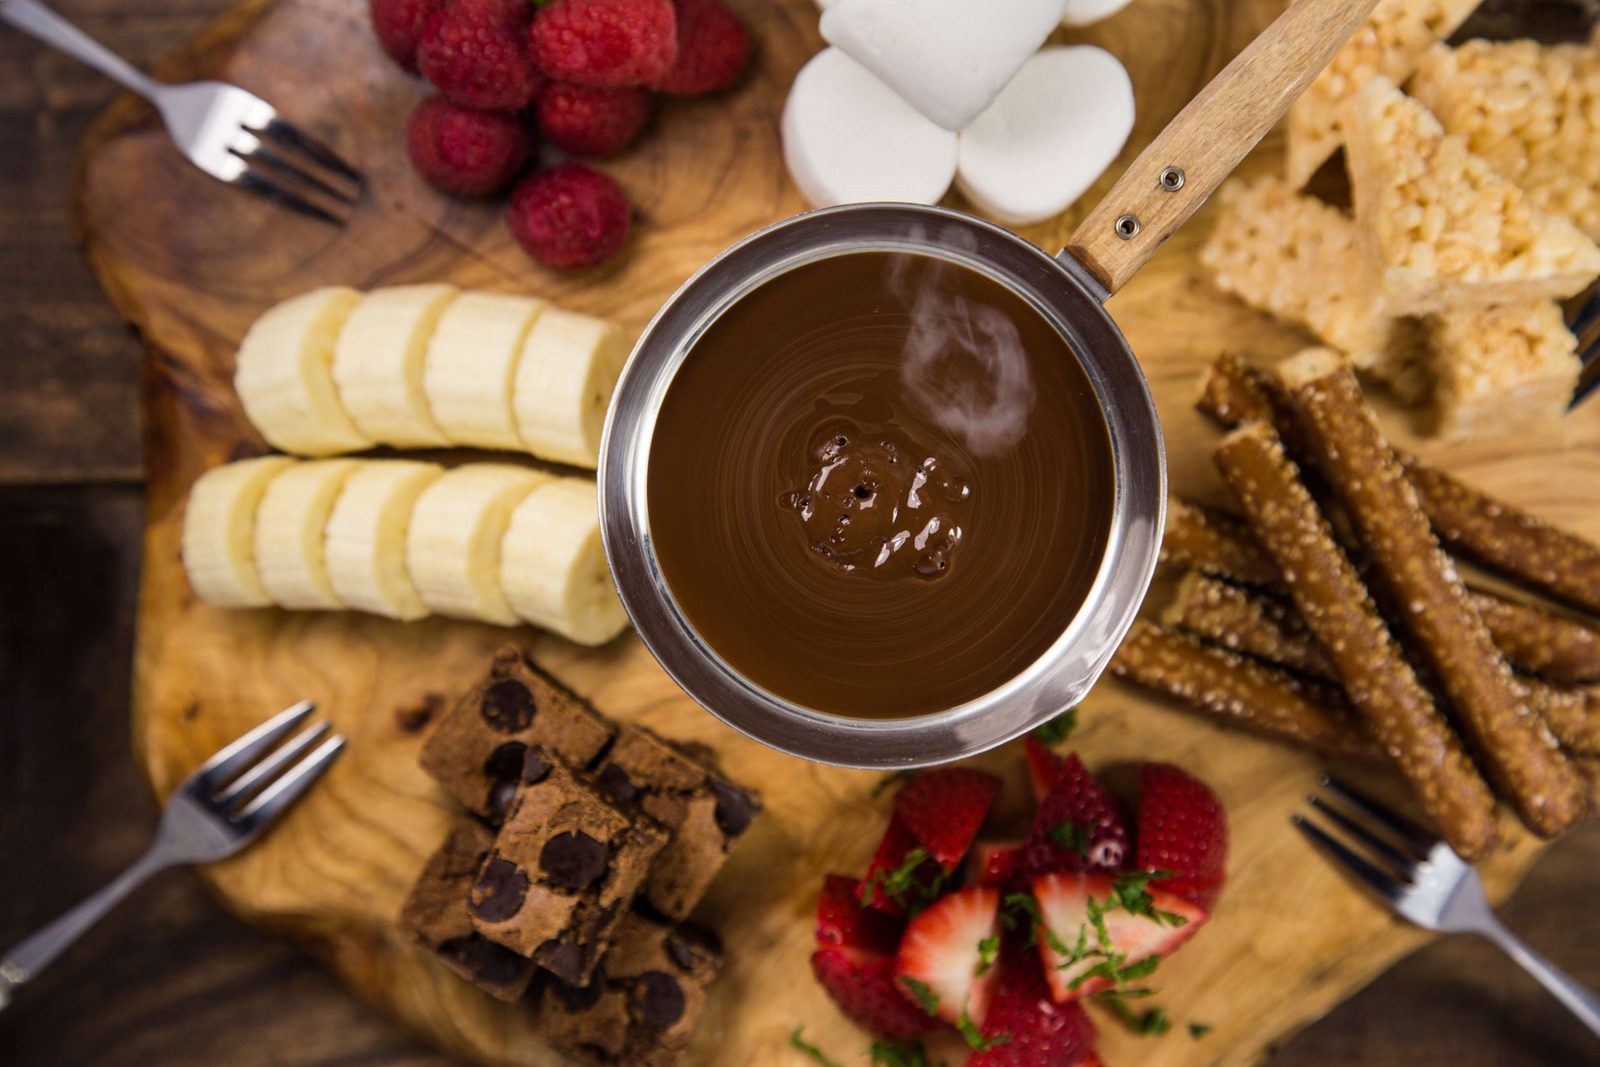 🍫 We Know Whether You’re an Introvert, Extrovert, Or Ambivert Based on How You Rate These Chocolate Desserts Chocolate Fondue Dessert